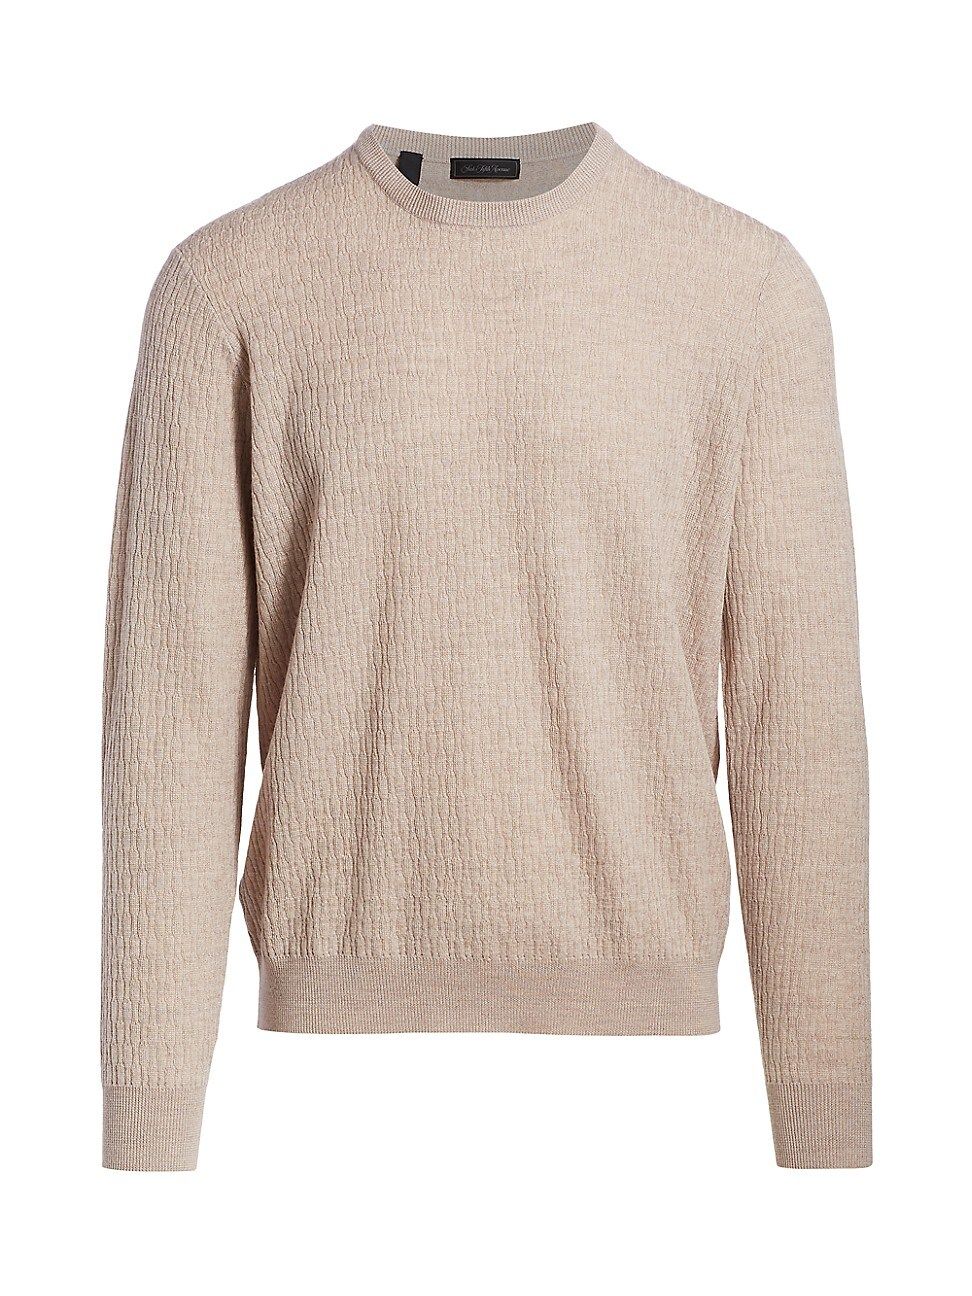 Saks Fifth Avenue Men's COLLECTION Lightweight Cable Knit Sweater - Tan - Size Large | Saks Fifth Avenue